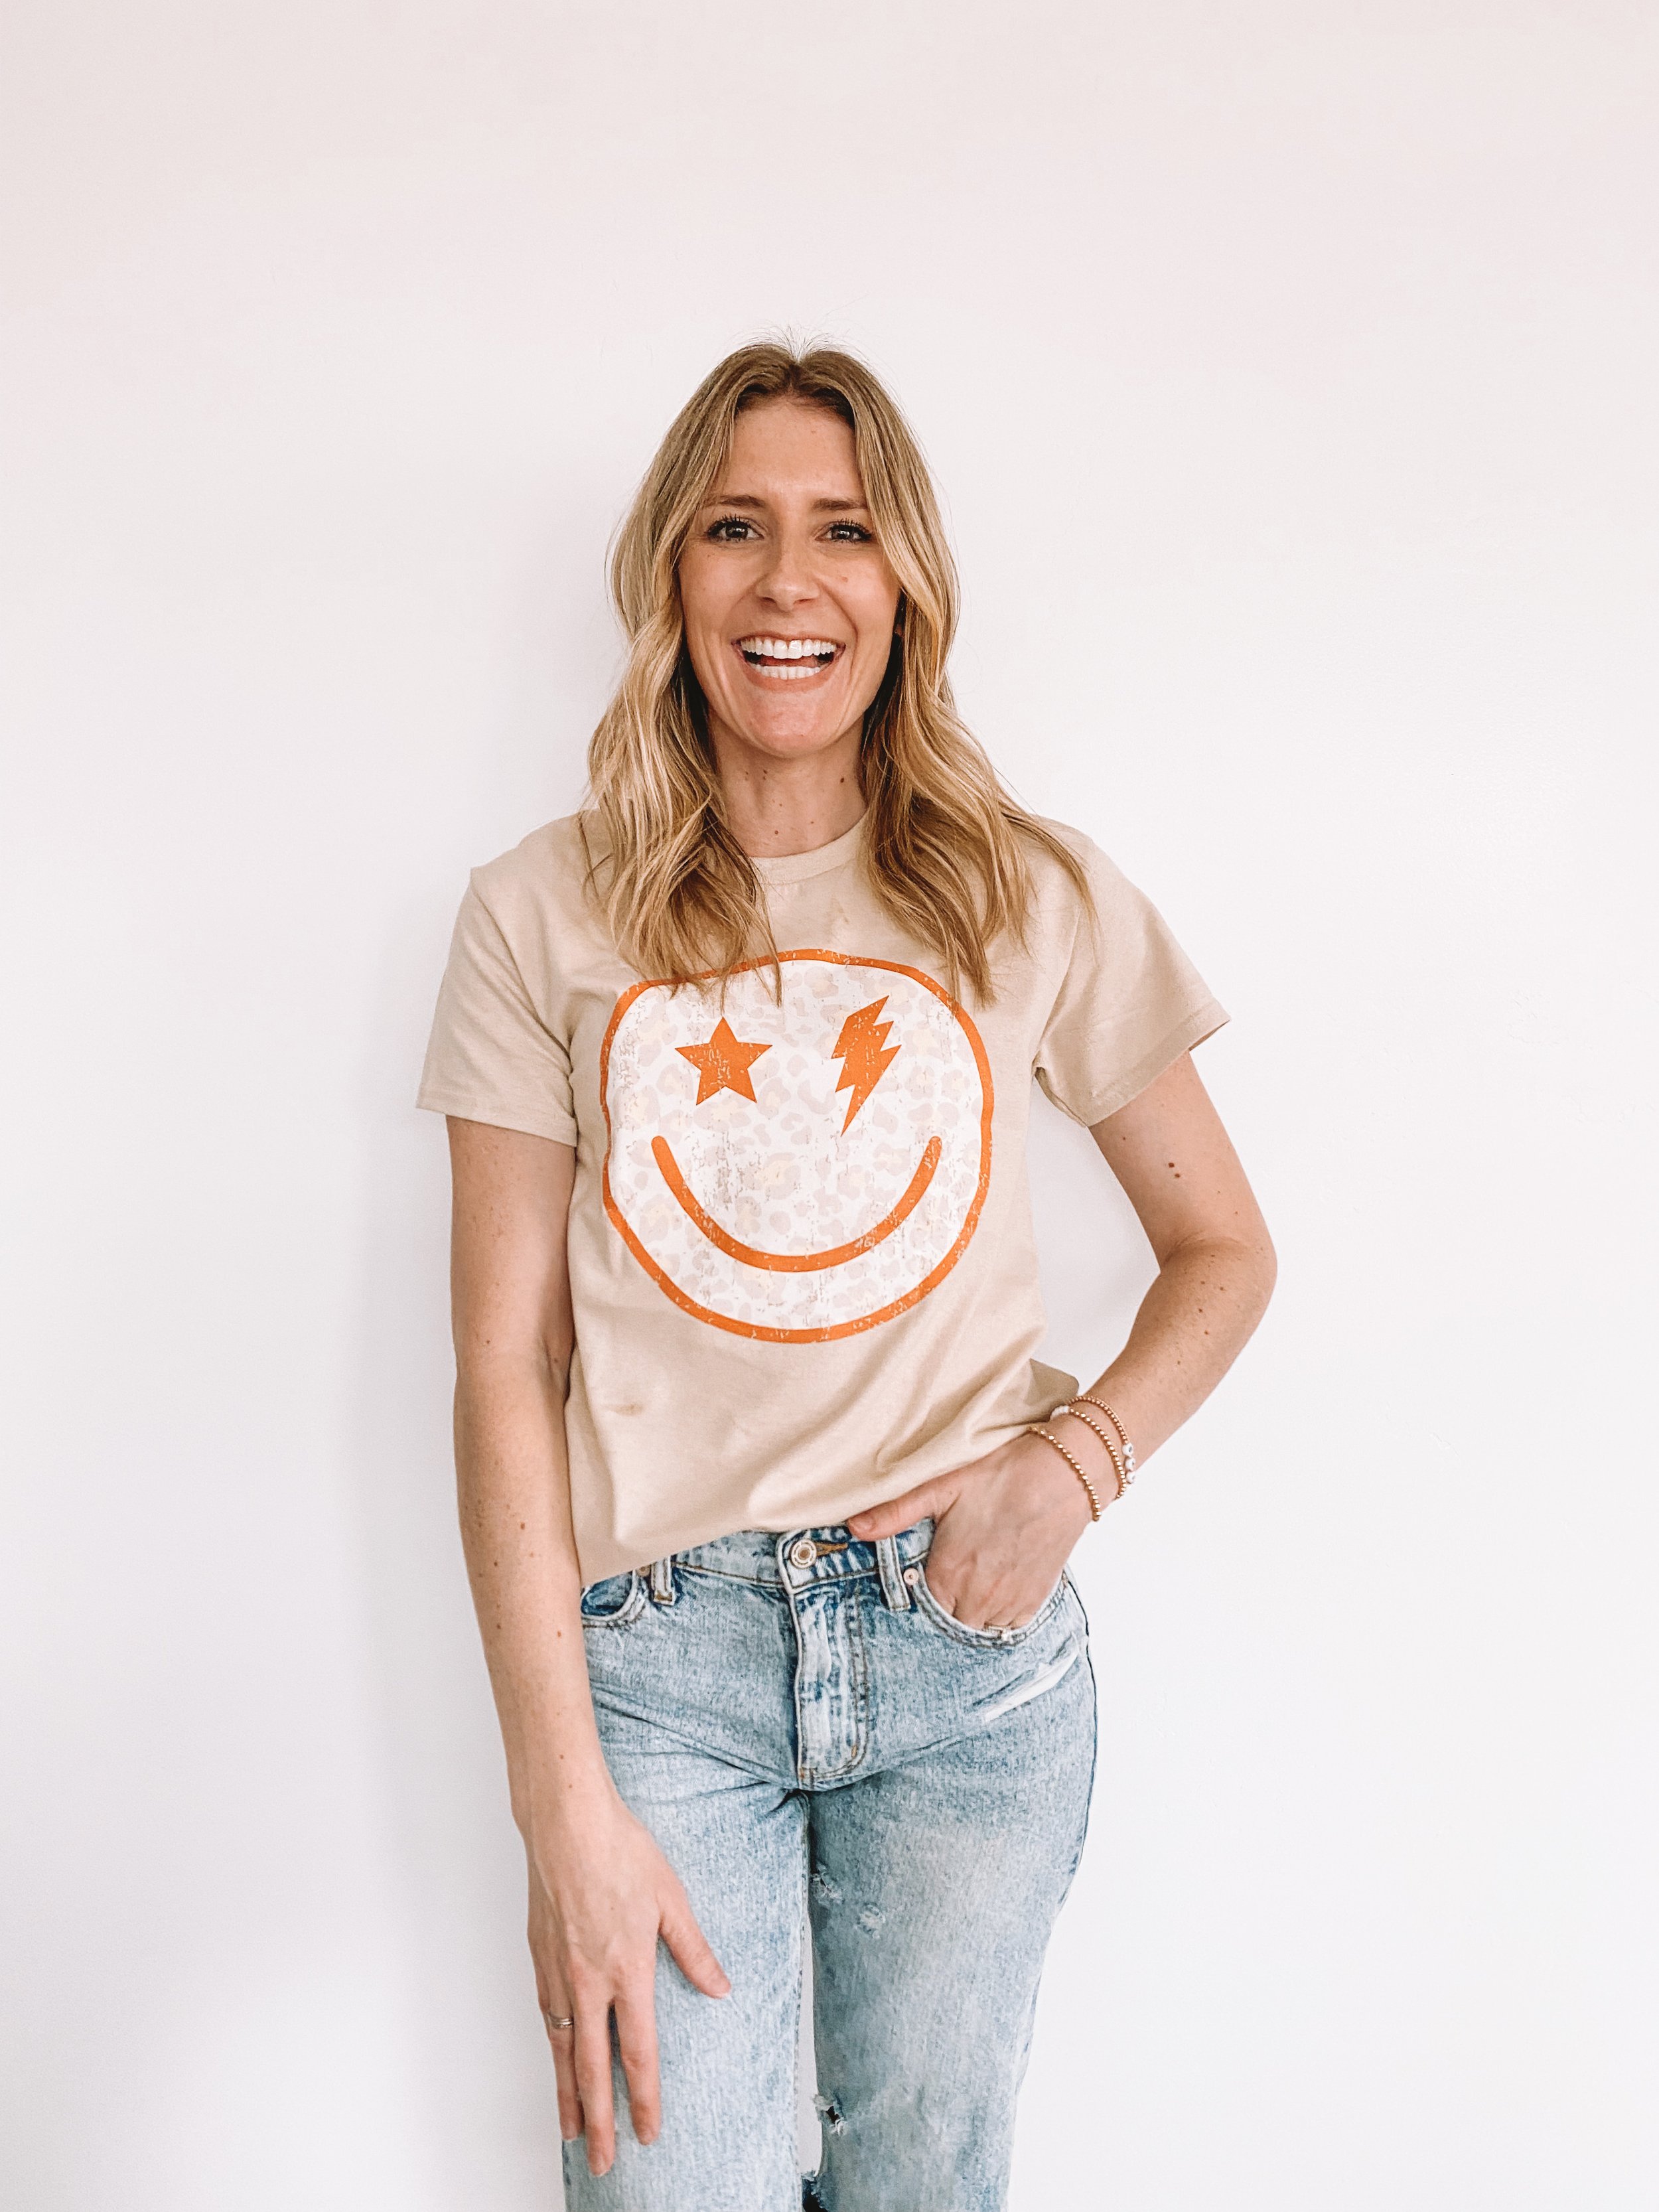 Women's Smiley Face Tees + Shirts